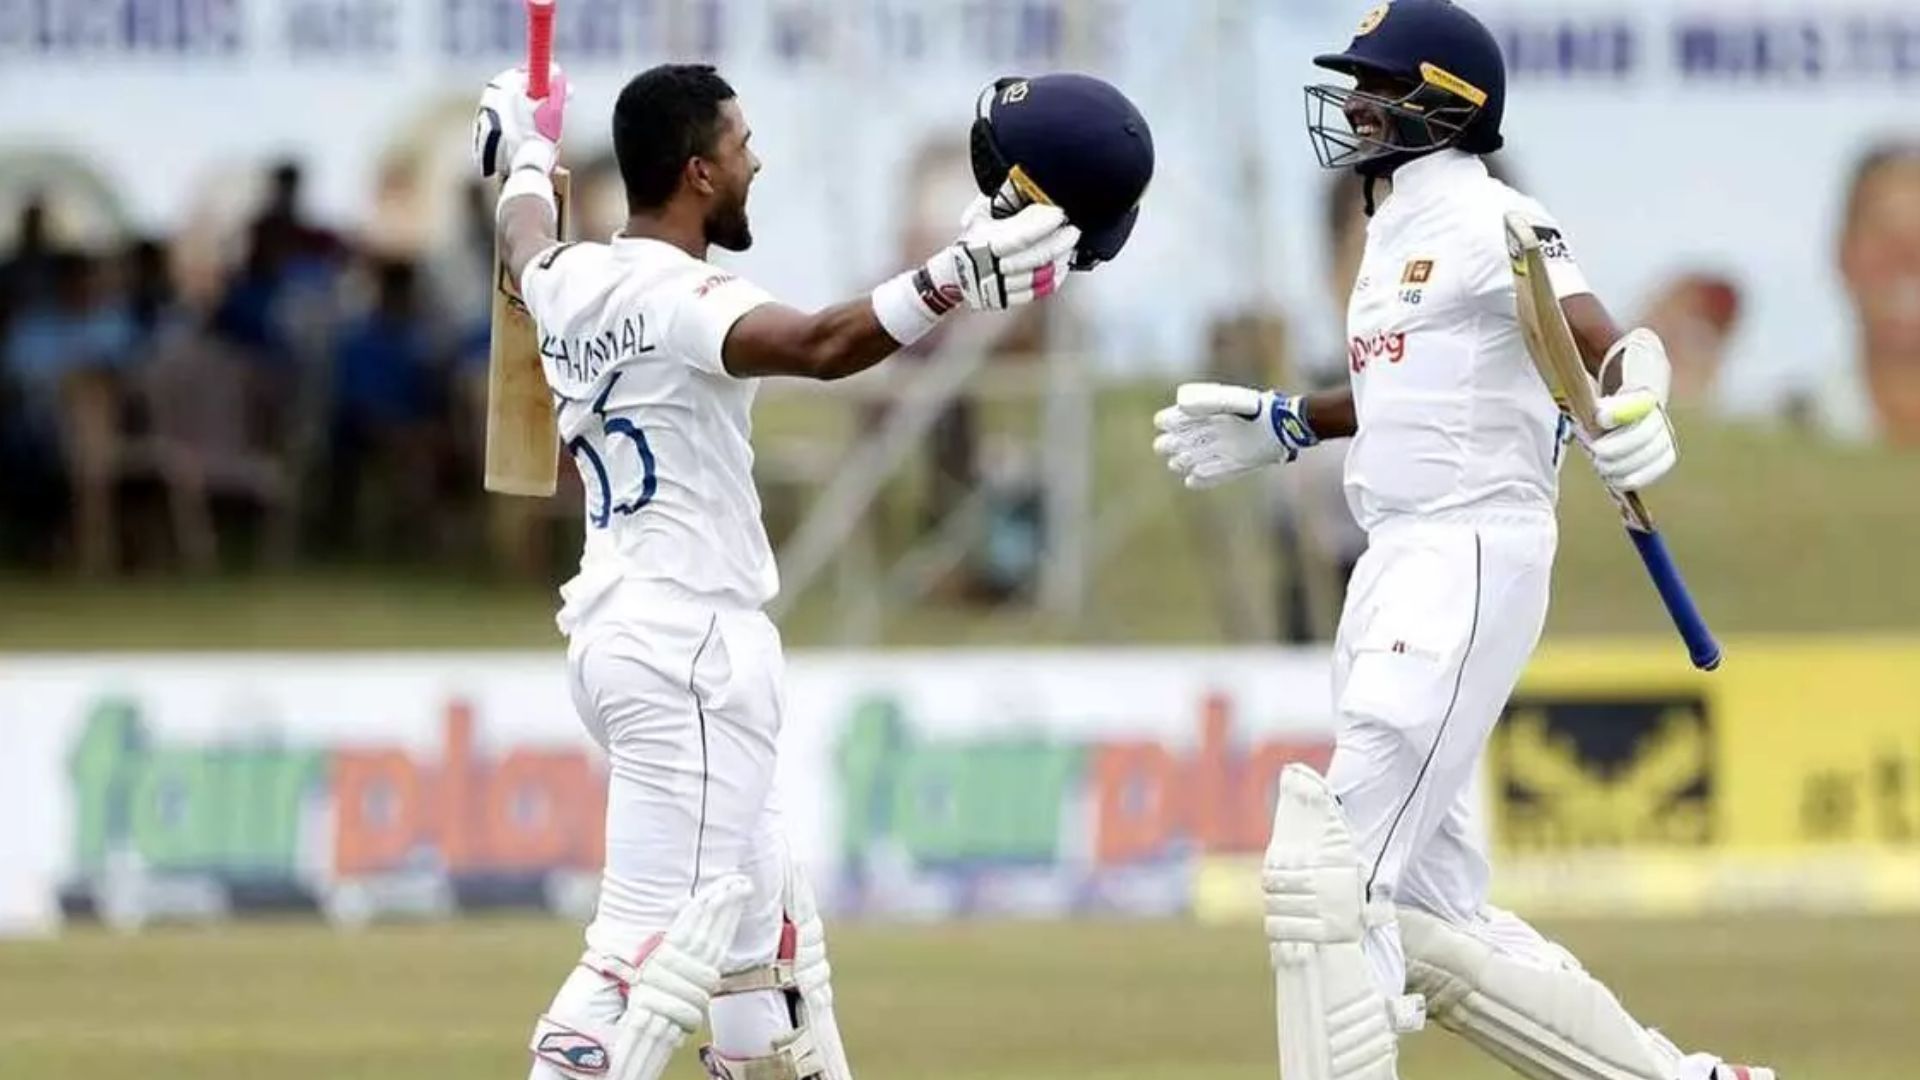 Dinesh Chandimal scored a memorable double-hundred to help Sri Lanka beat Australia in what was a much-needed pick-me-up for the entire nation.